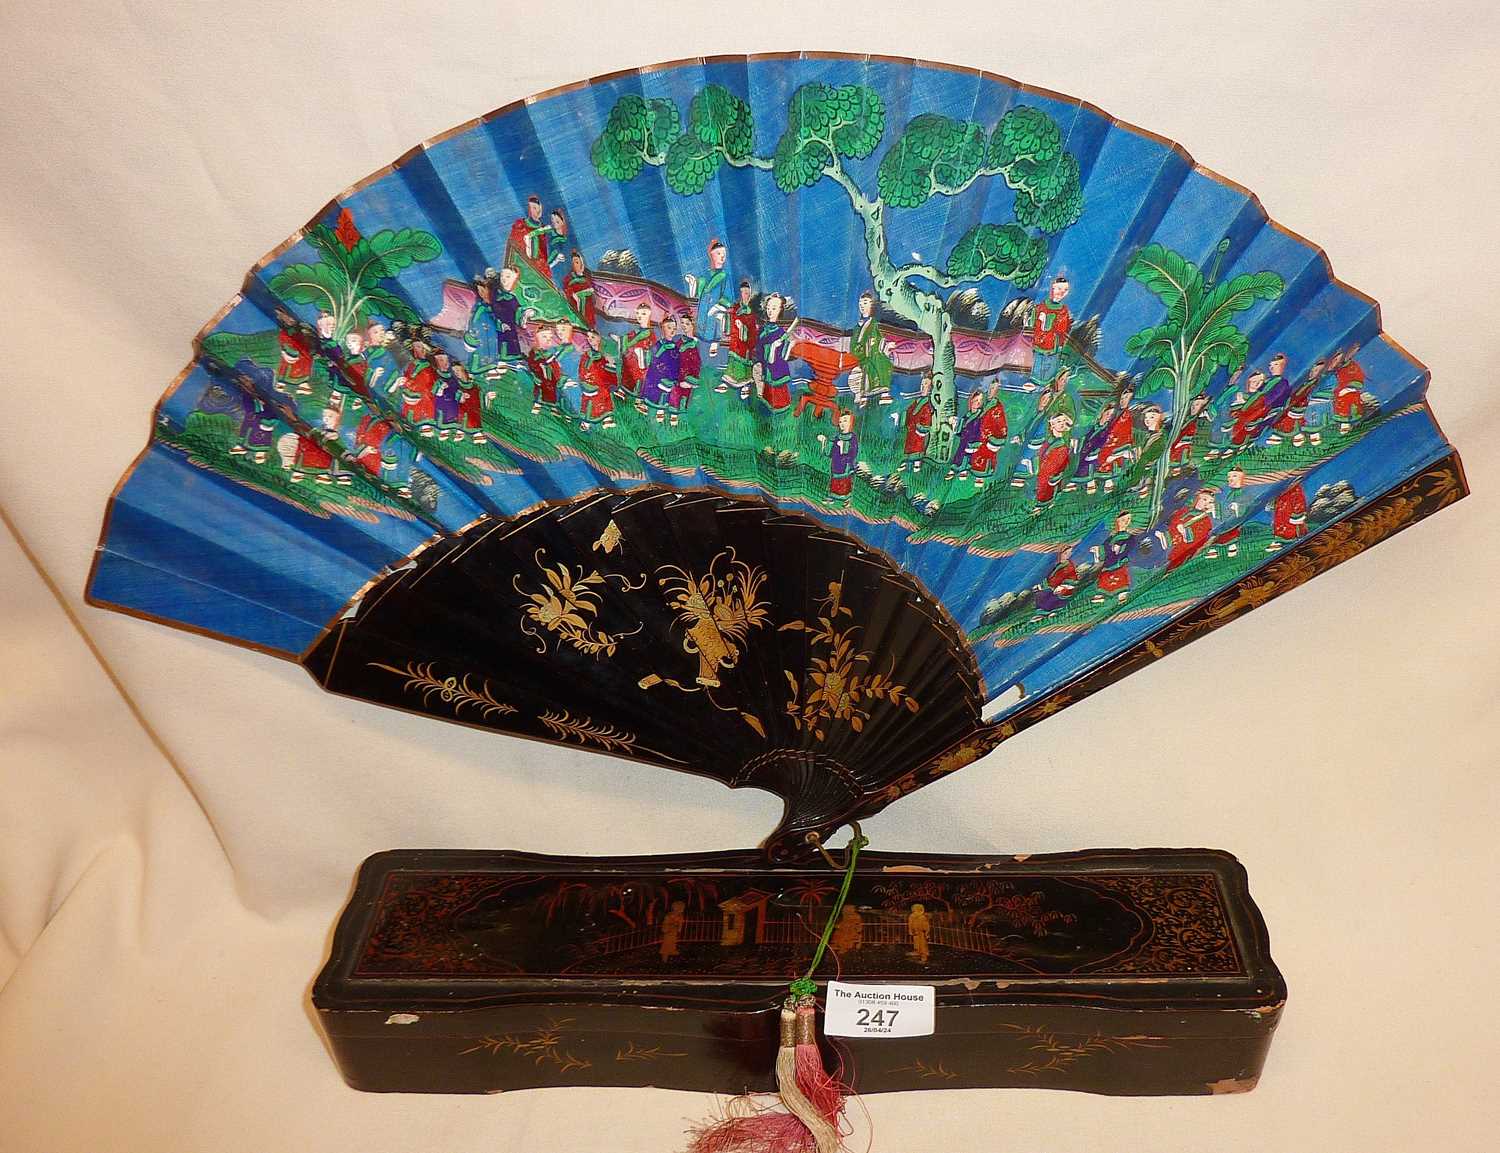 19th century hand painted and double-sided Canton fan with fitted lacquered case (approx 35.5cms